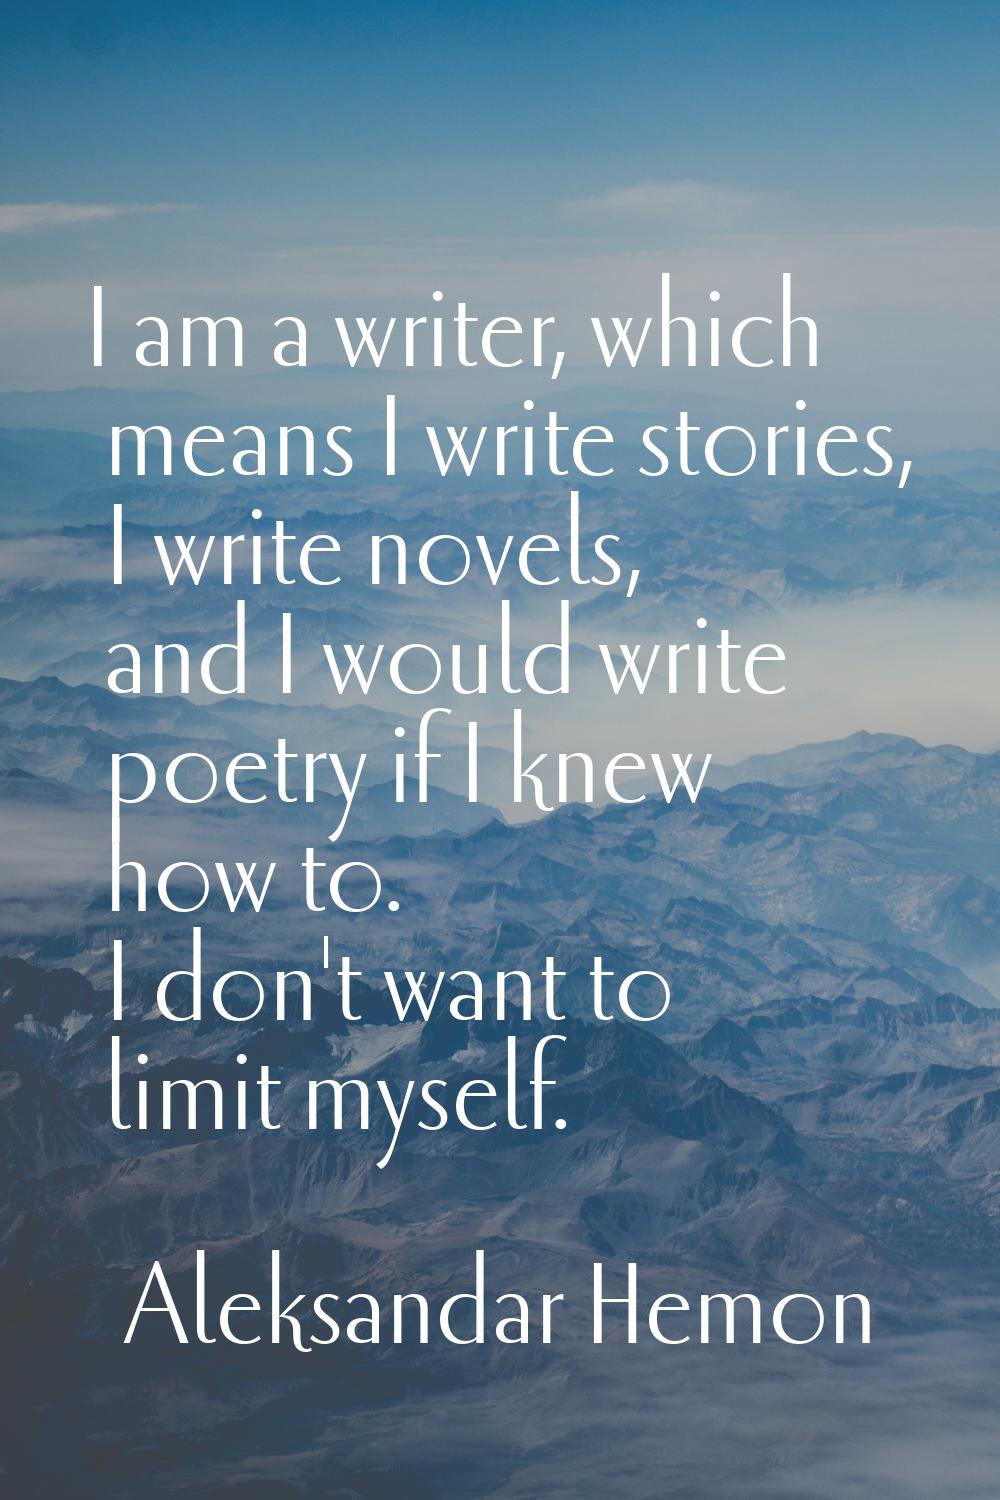 I am a writer, which means I write stories, I write novels, and I would write poetry if I knew how 